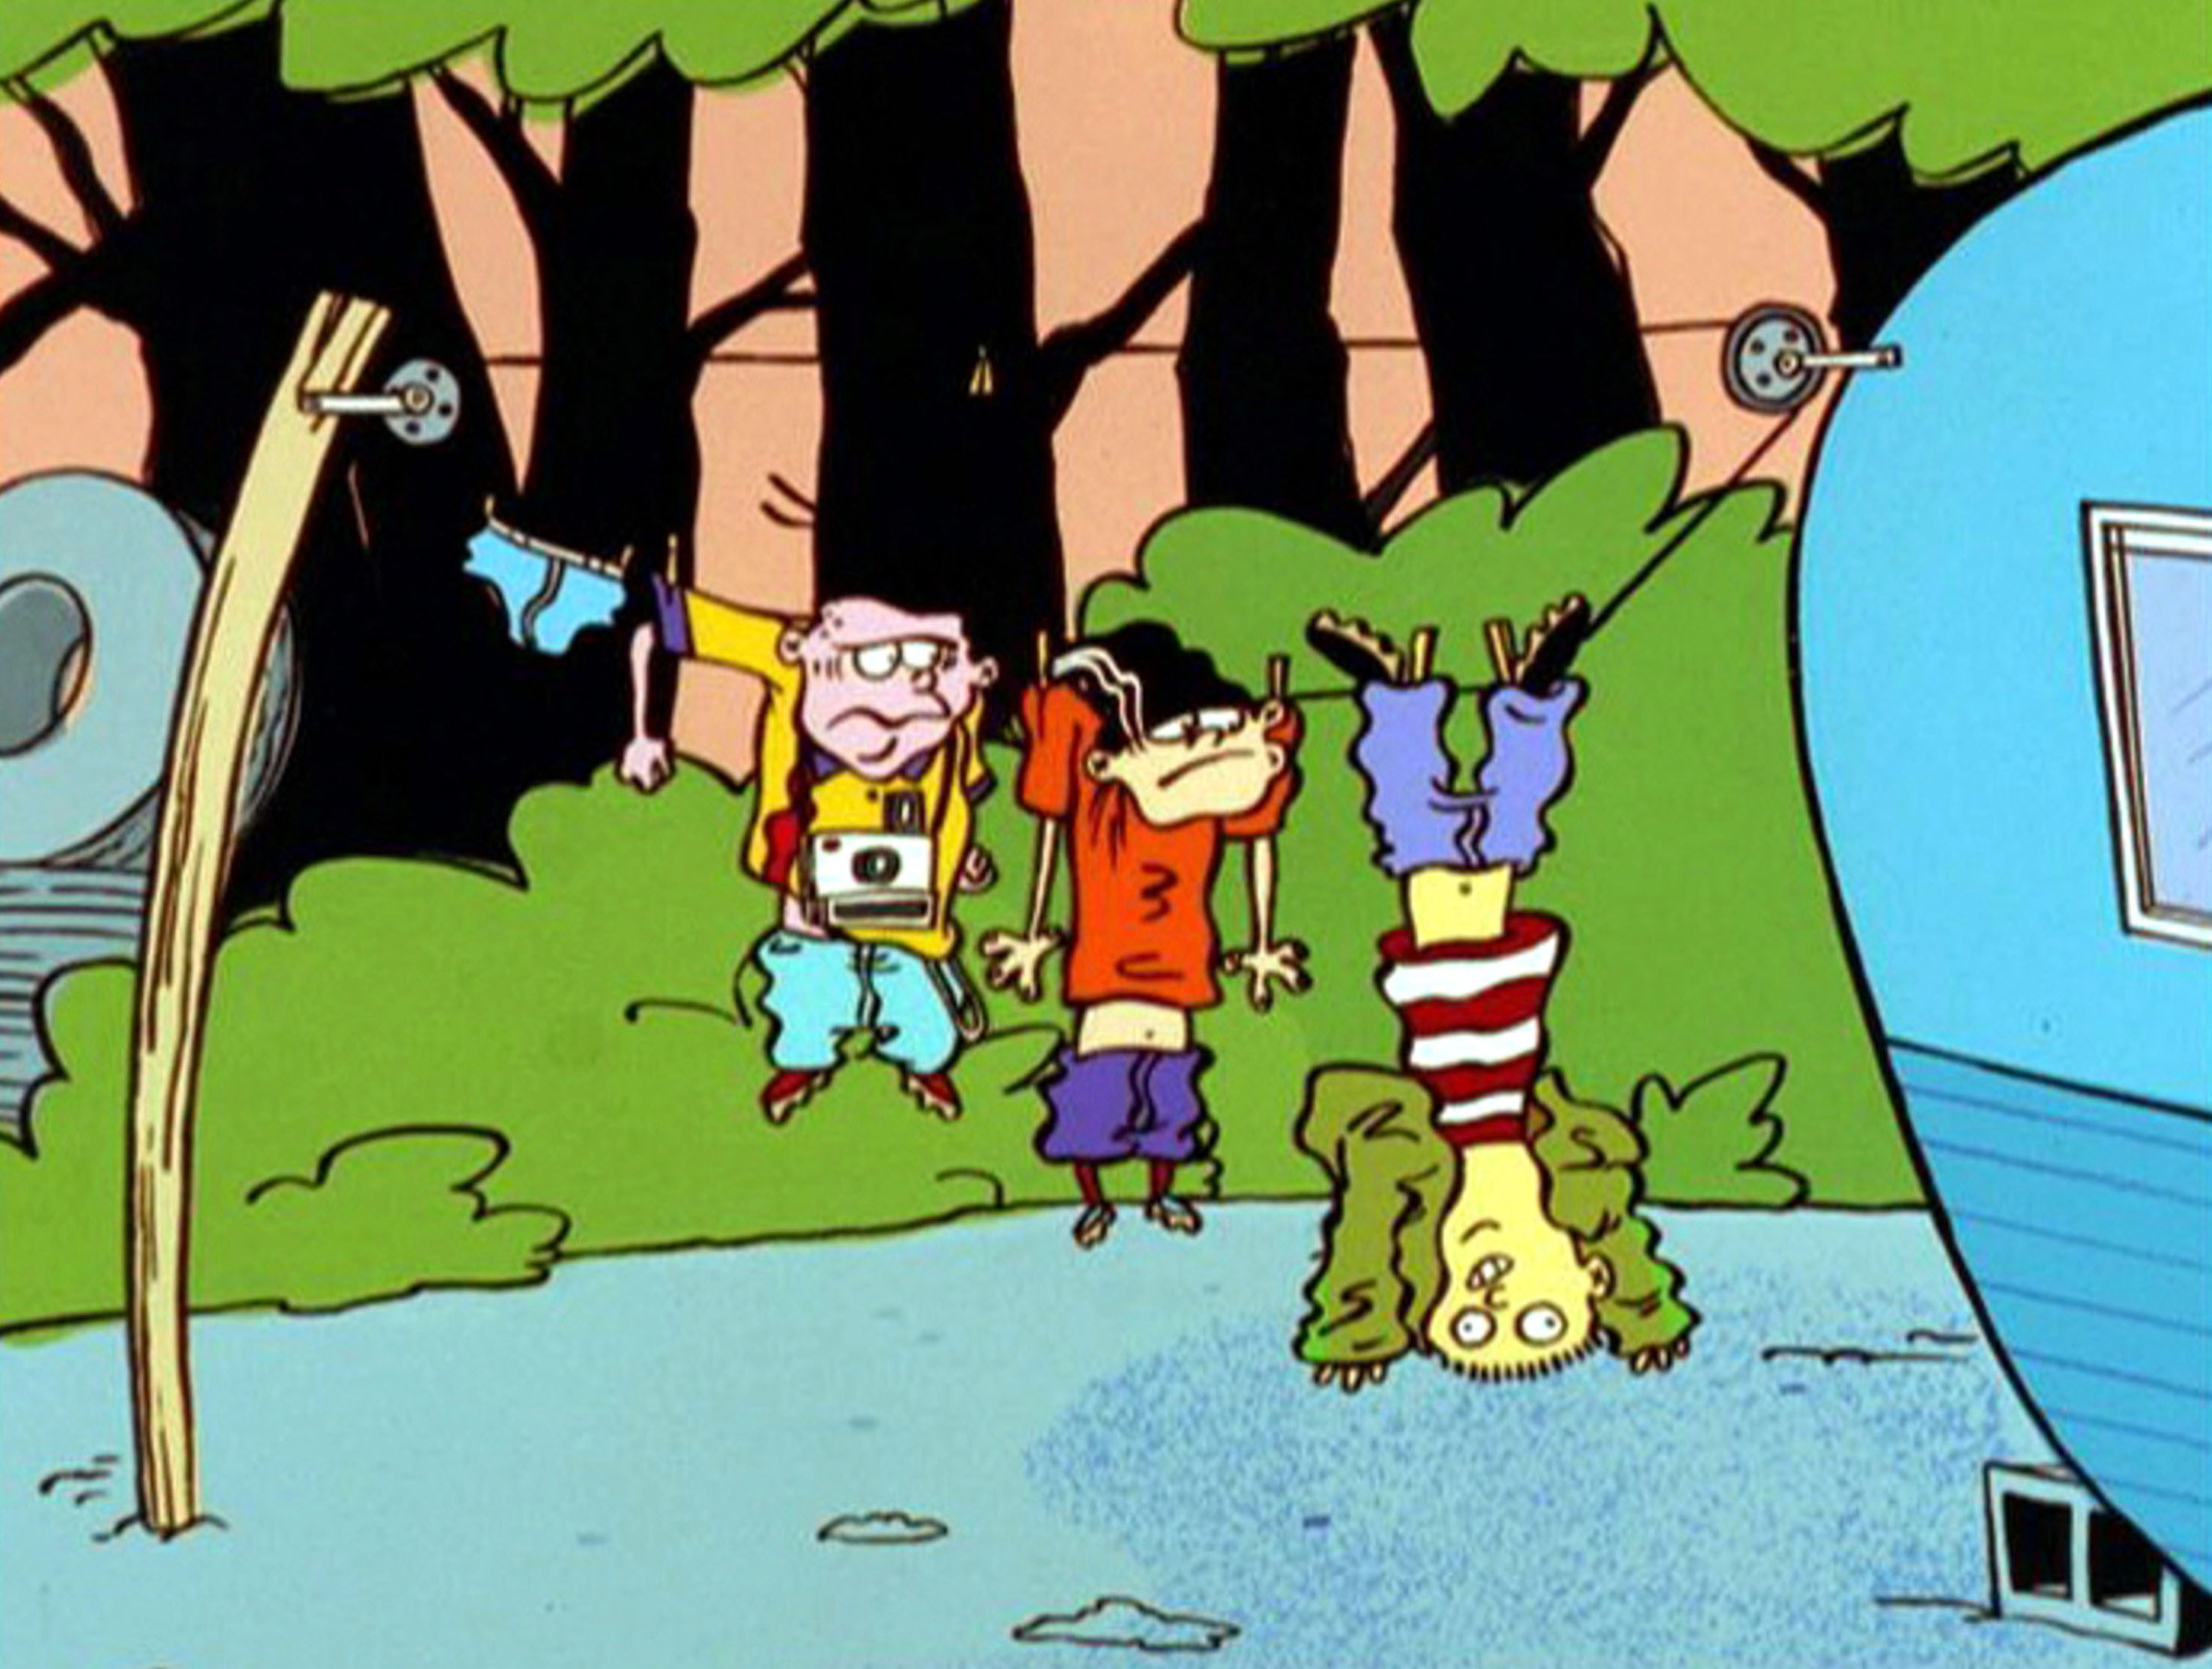 Ed, Edd and Eddy hang from a clothesline outside of a trailer, Ed hangs upside down by his feet while Double D and Eddy are pinned by their sleeves